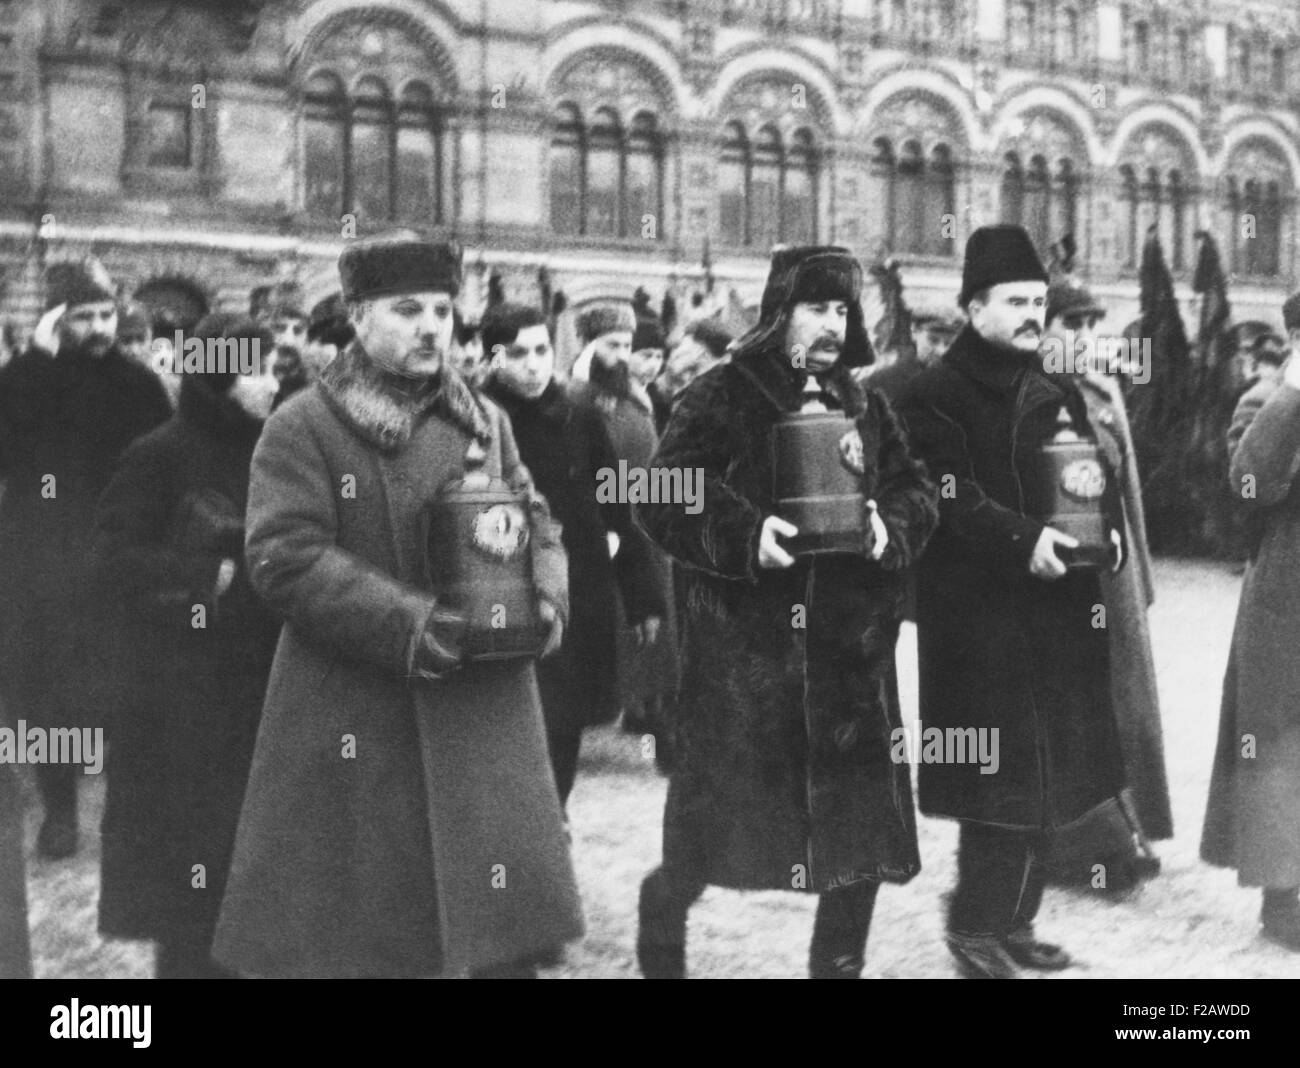 K.E. Voroshilov, Joseph Stalin, V.M. Molotov at funeral for Soviet stratosphere martyrs. On Jan 30, 1934, Osoaviakhim-1, a hydrogen-filled high-altitude balloon carried a capsule with a crew of three 72,000 feet into the Earth's stratosphere. Catastrophic loss of buoyancy resulted in a crash that killed all the men. (CSU 2015 11 1386) Stock Photo